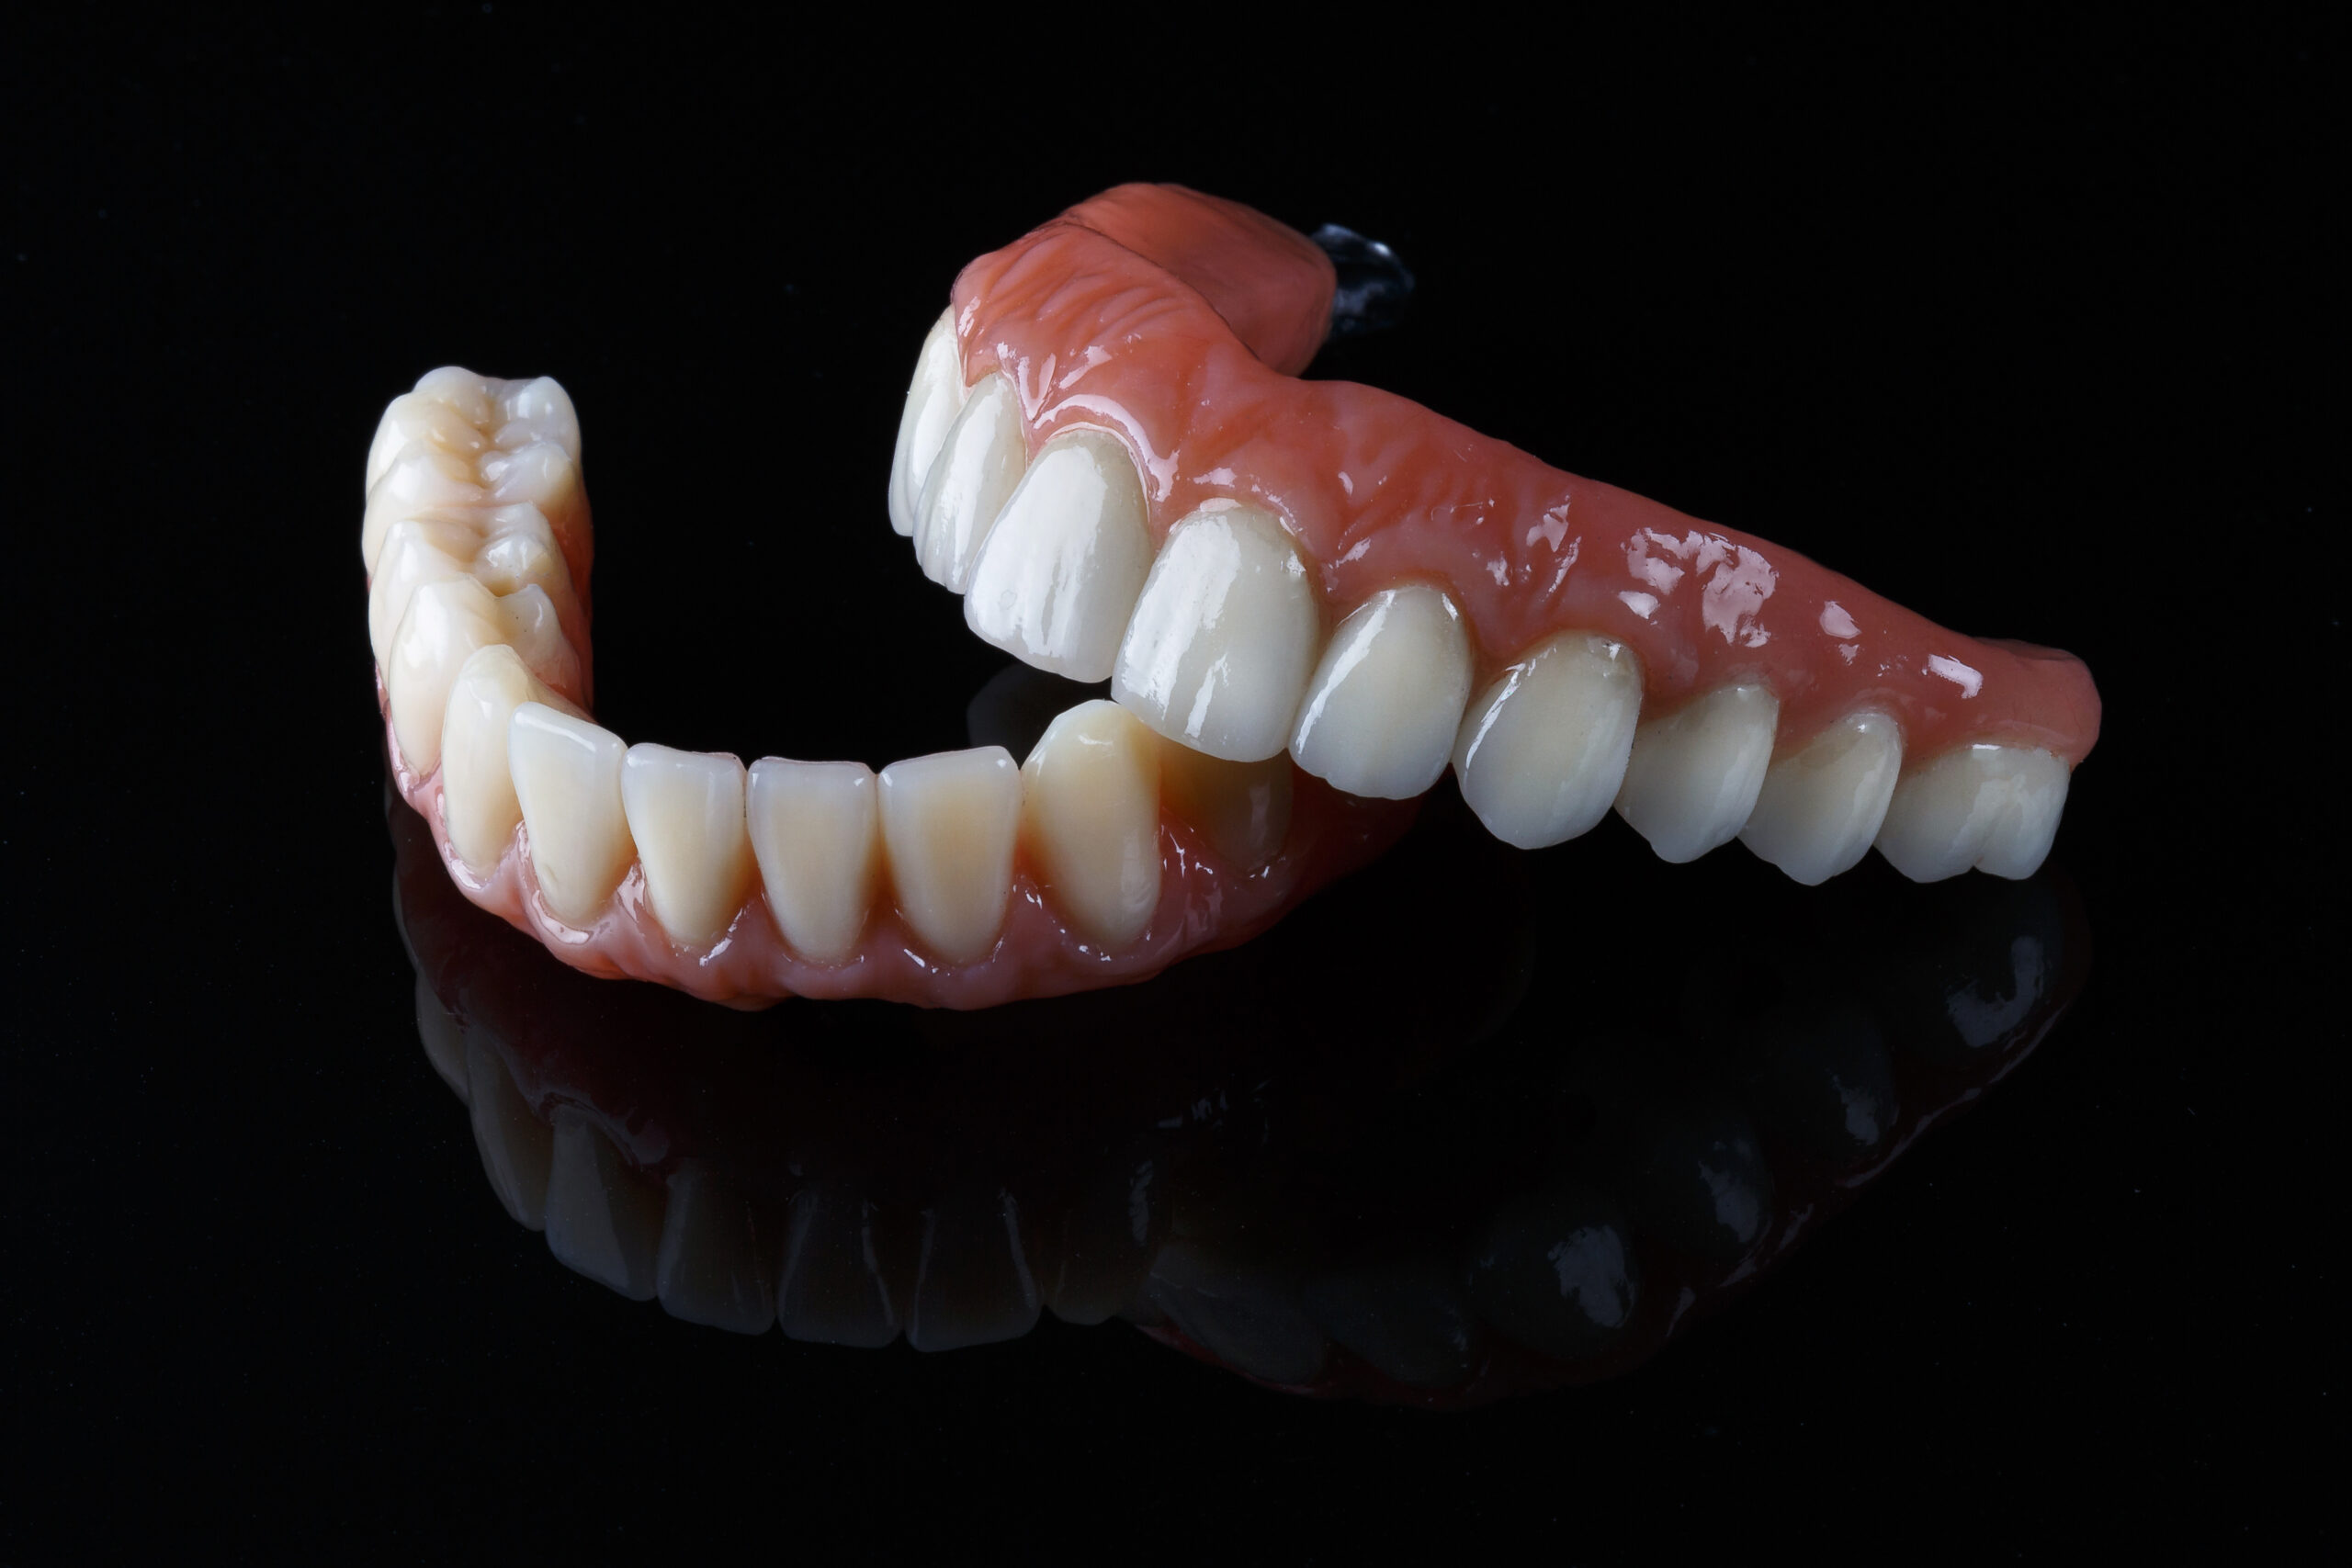 Close-up 3d model of two dentures in a black background